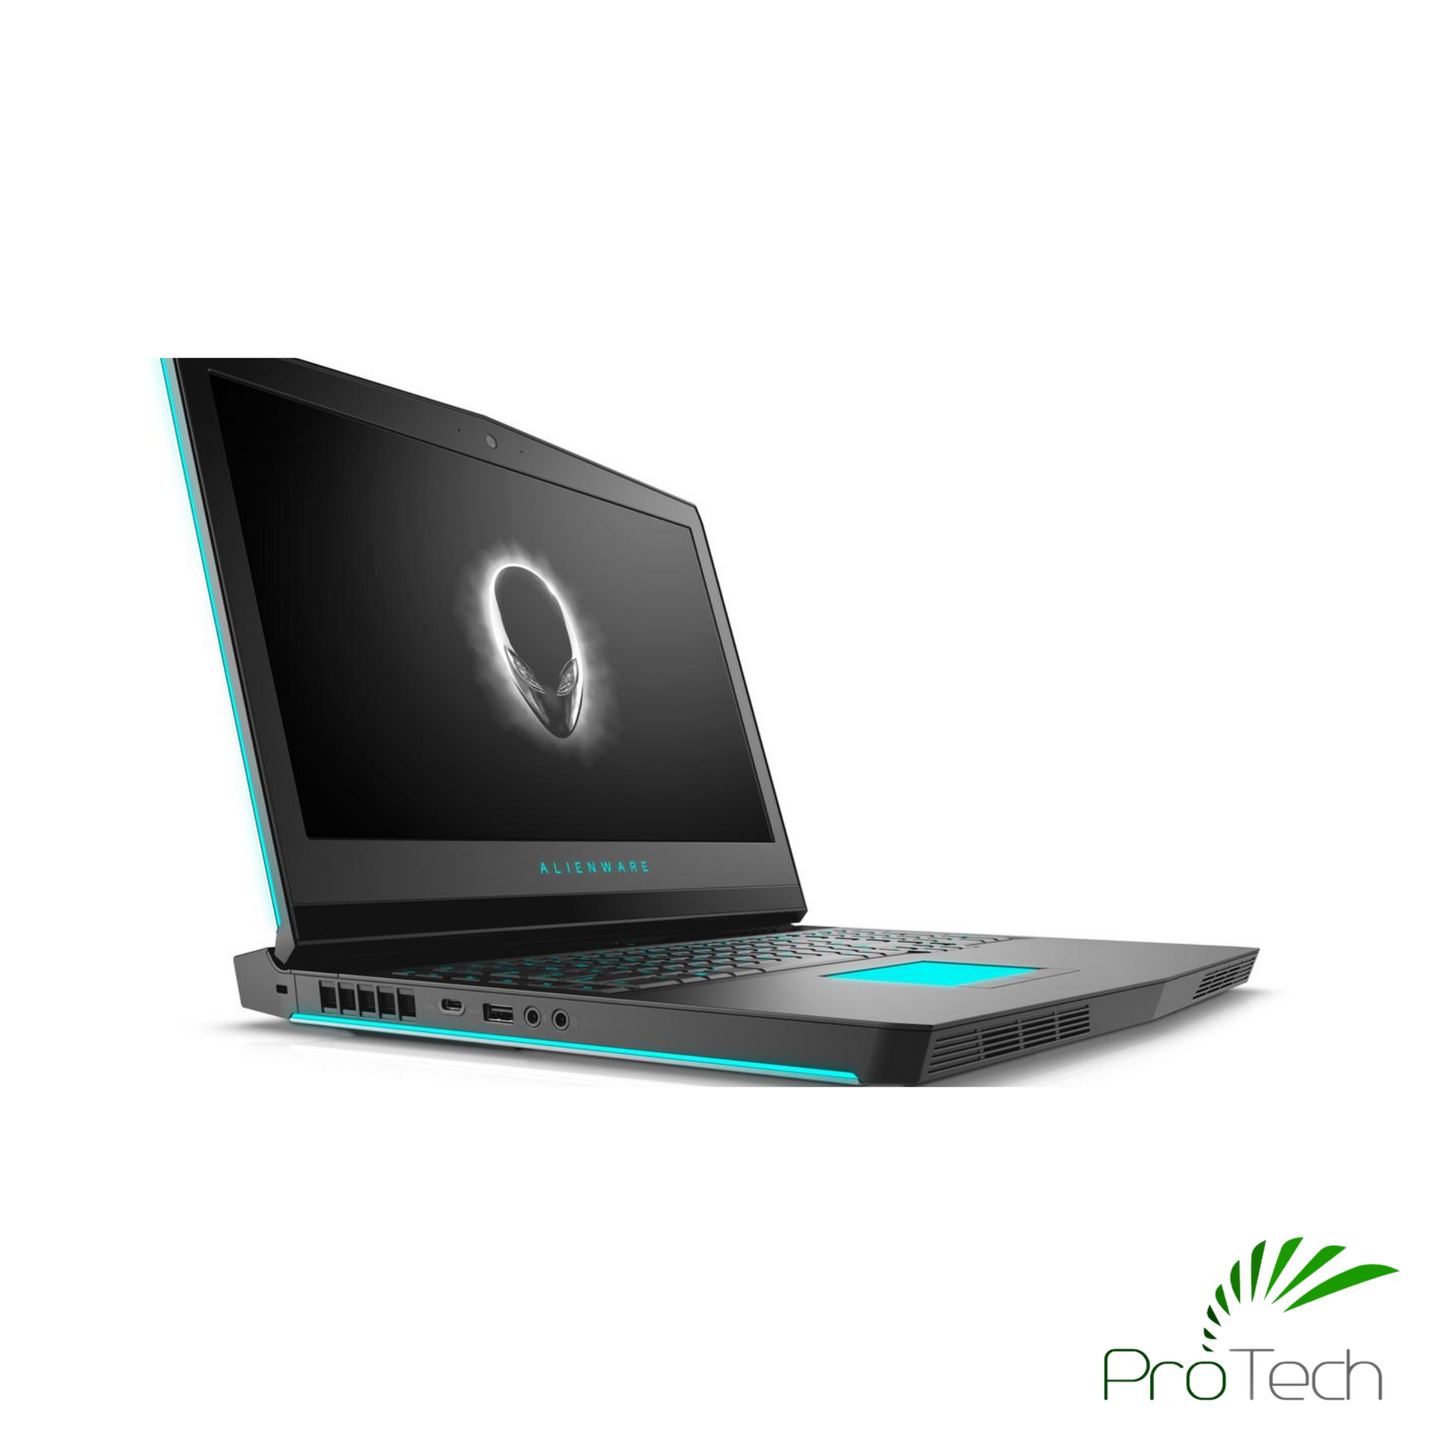 Dell Alienware 17 R5 17.3" Gaming Laptop | Core i7 | 16GB RAM | 256GB SSD + 1TB HDD